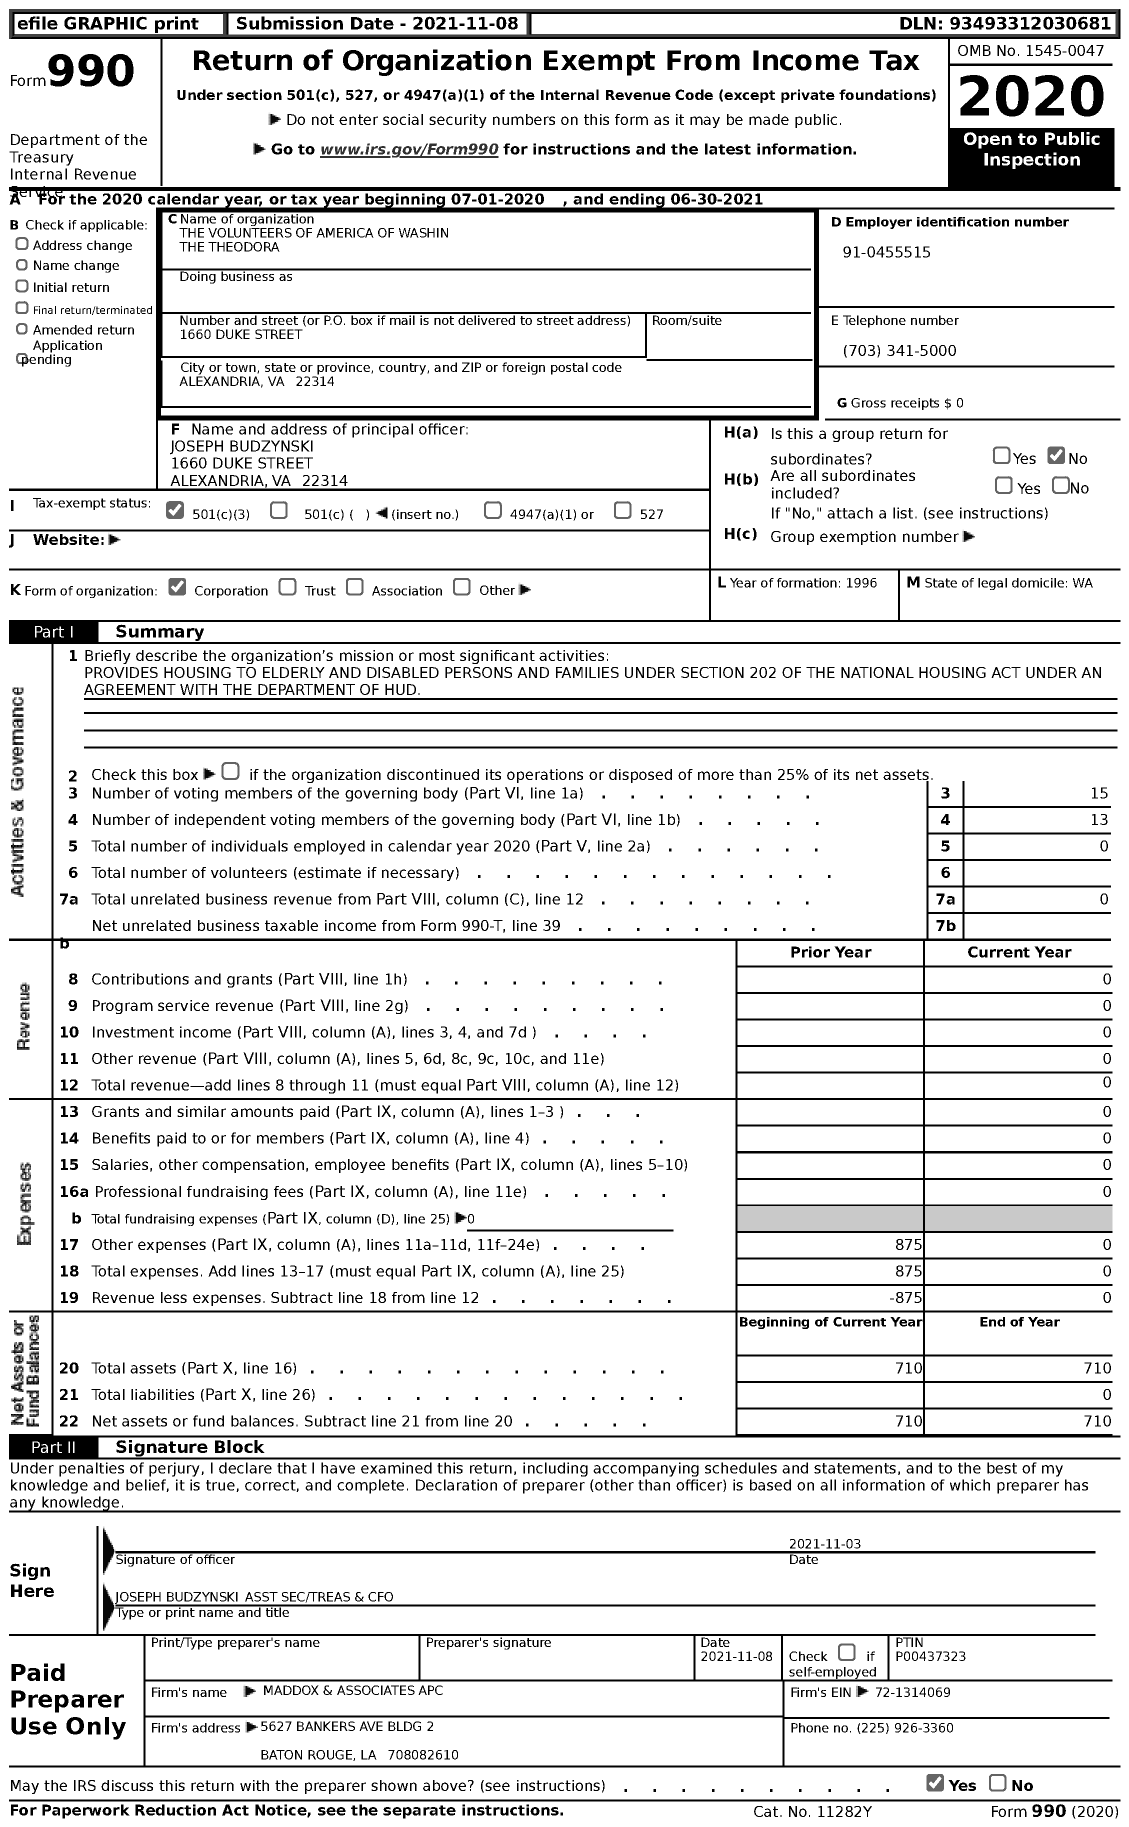 Image of first page of 2020 Form 990 for The Volunteers of America of Washin the Theodora (VOA)